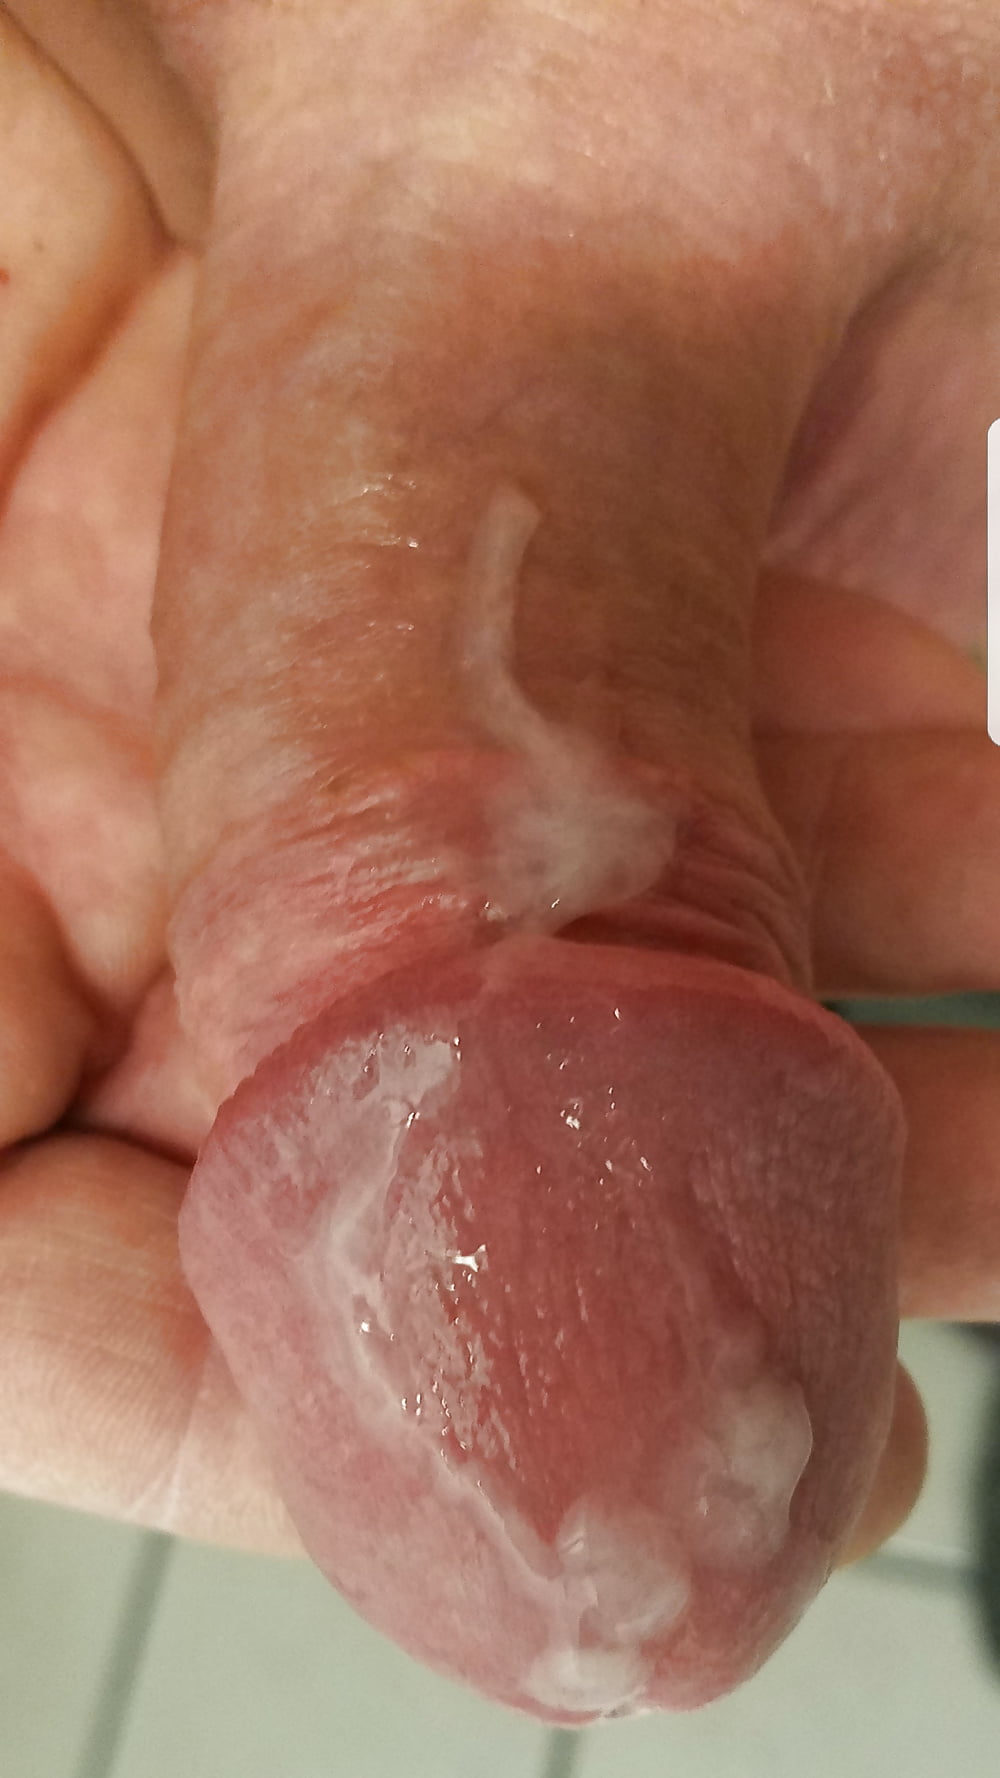 My coc covered in cum after creampie gangbang (10/10)